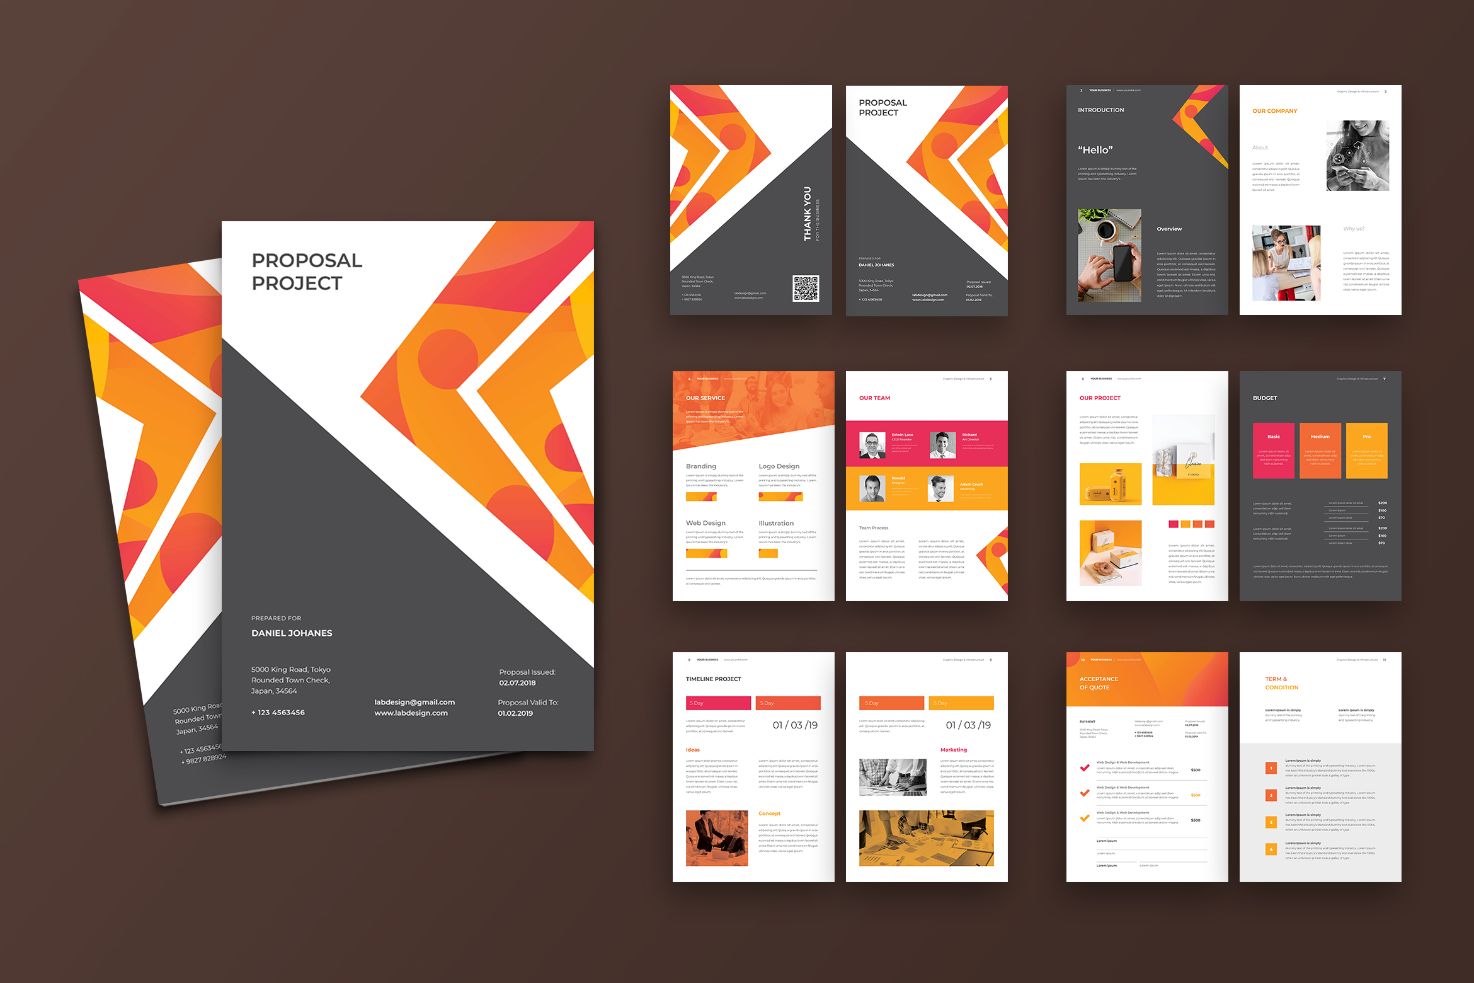 Creative Project Proposal Template Design - Geometric, Abstract and Modern Yellow, Orange & Grey Theme